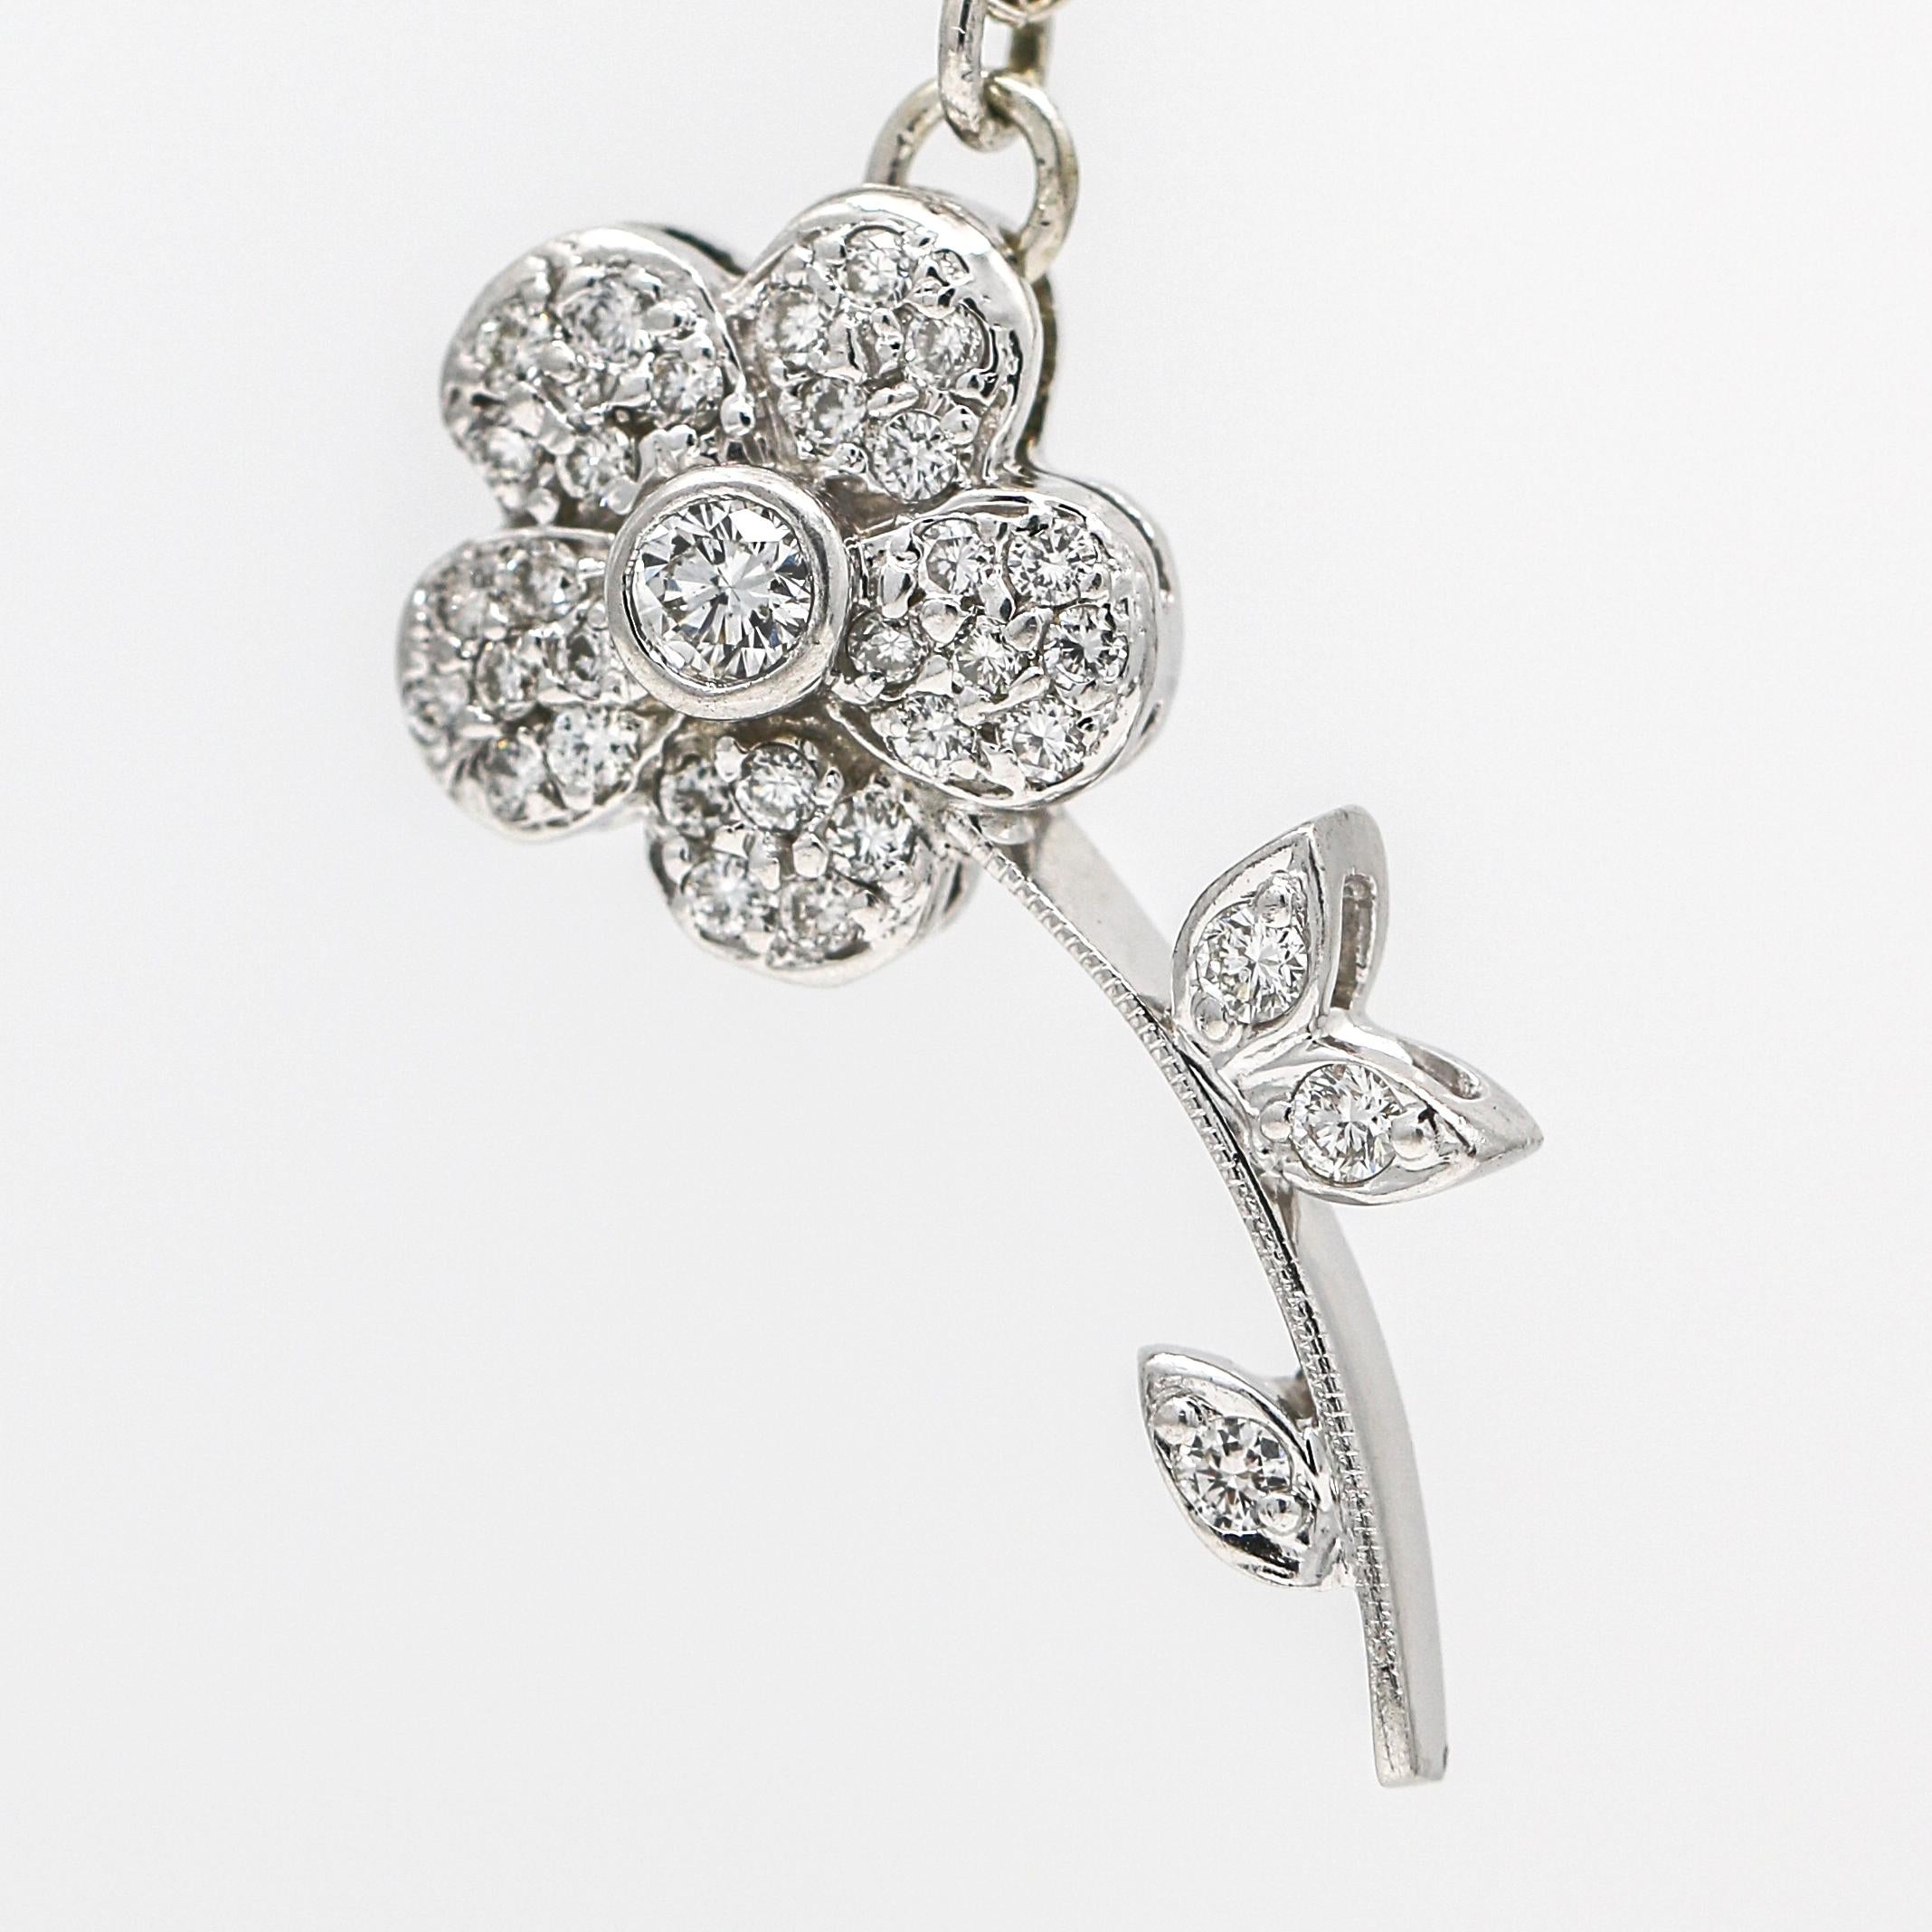 This exquisite Women's Diamond Flower Brooch has been transformed into a stunning pendant, making it an even more versatile piece of jewelry. The pendant features beautiful sparkling diamonds and signed BK.

Attached to the pendant is an Art Deco